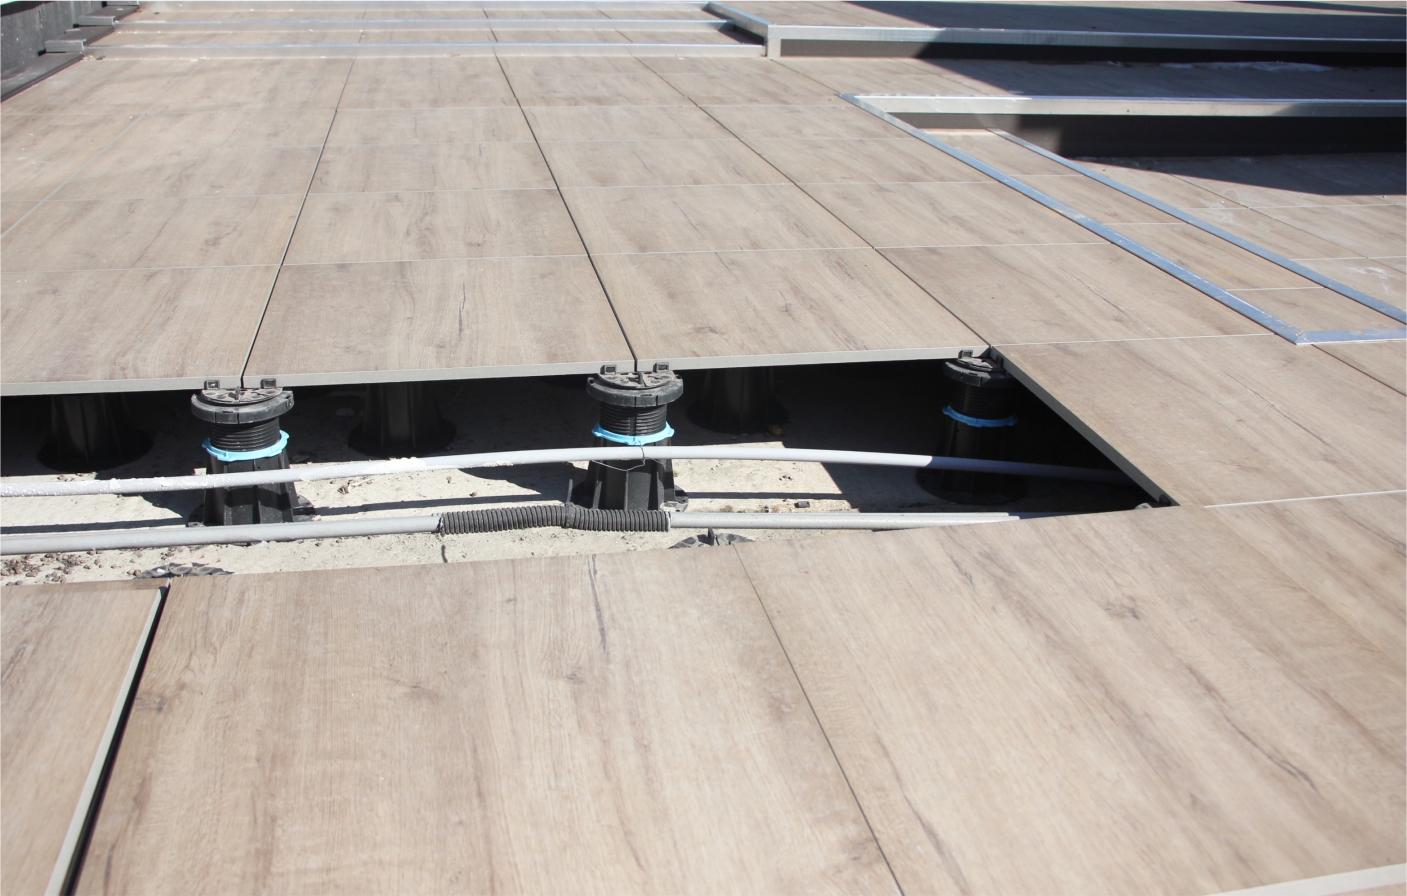 Construction of decks and floors on operated roofs.